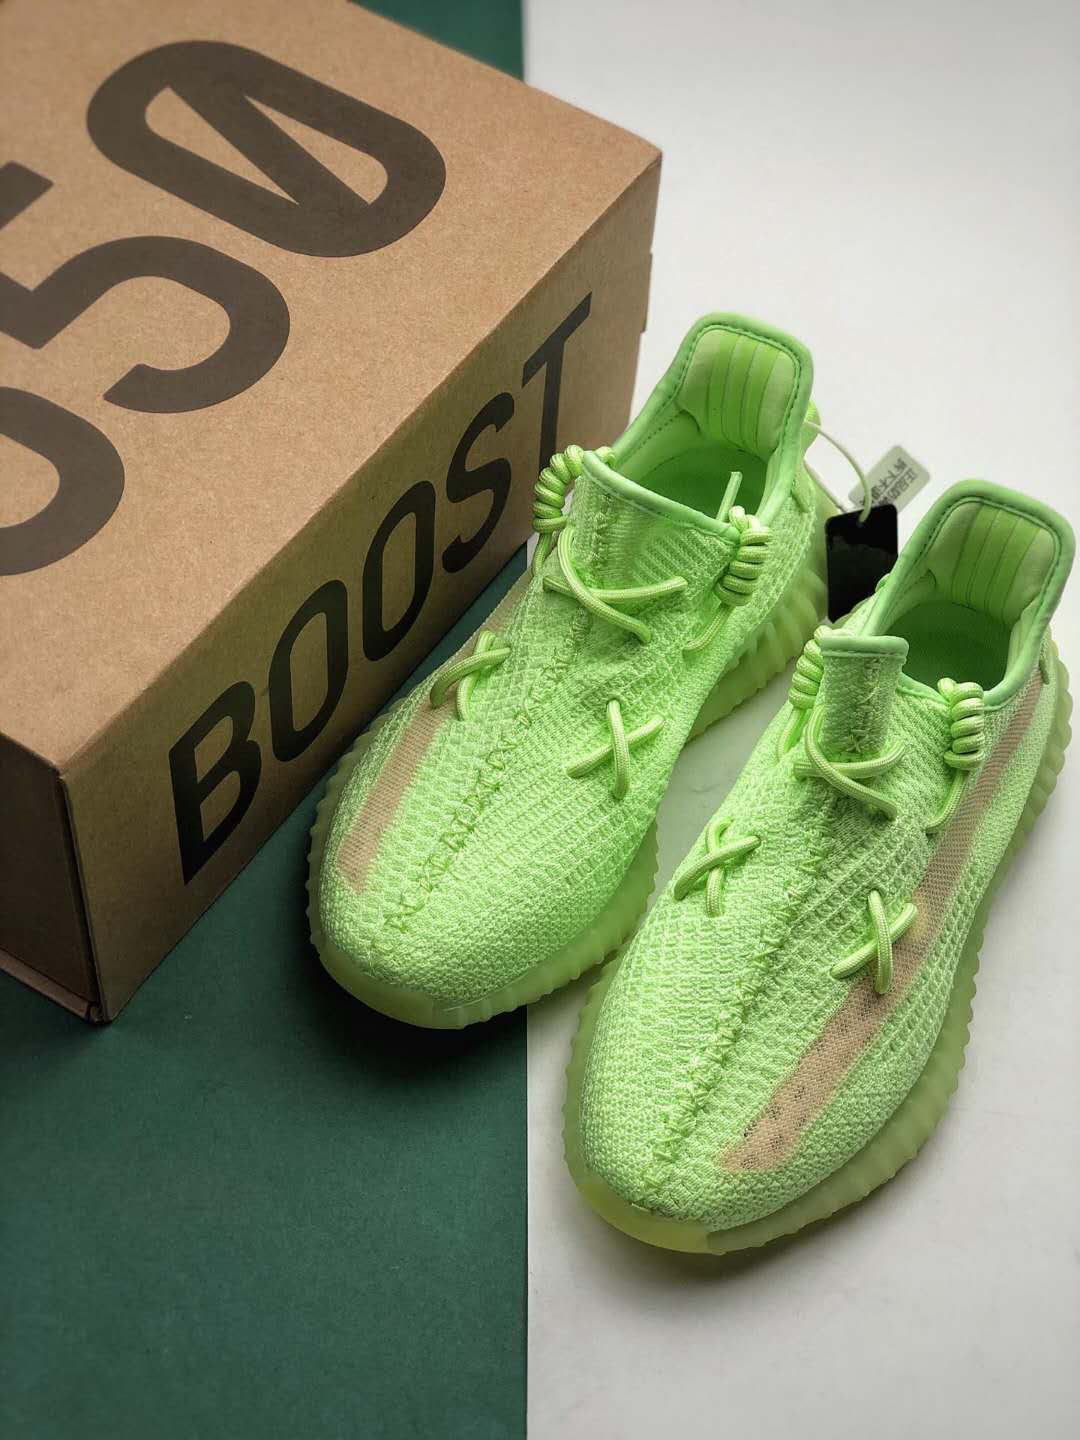 Adidas Yeezy Boost 350 V2 Glow EG5293: Stand Out with Reflective Style